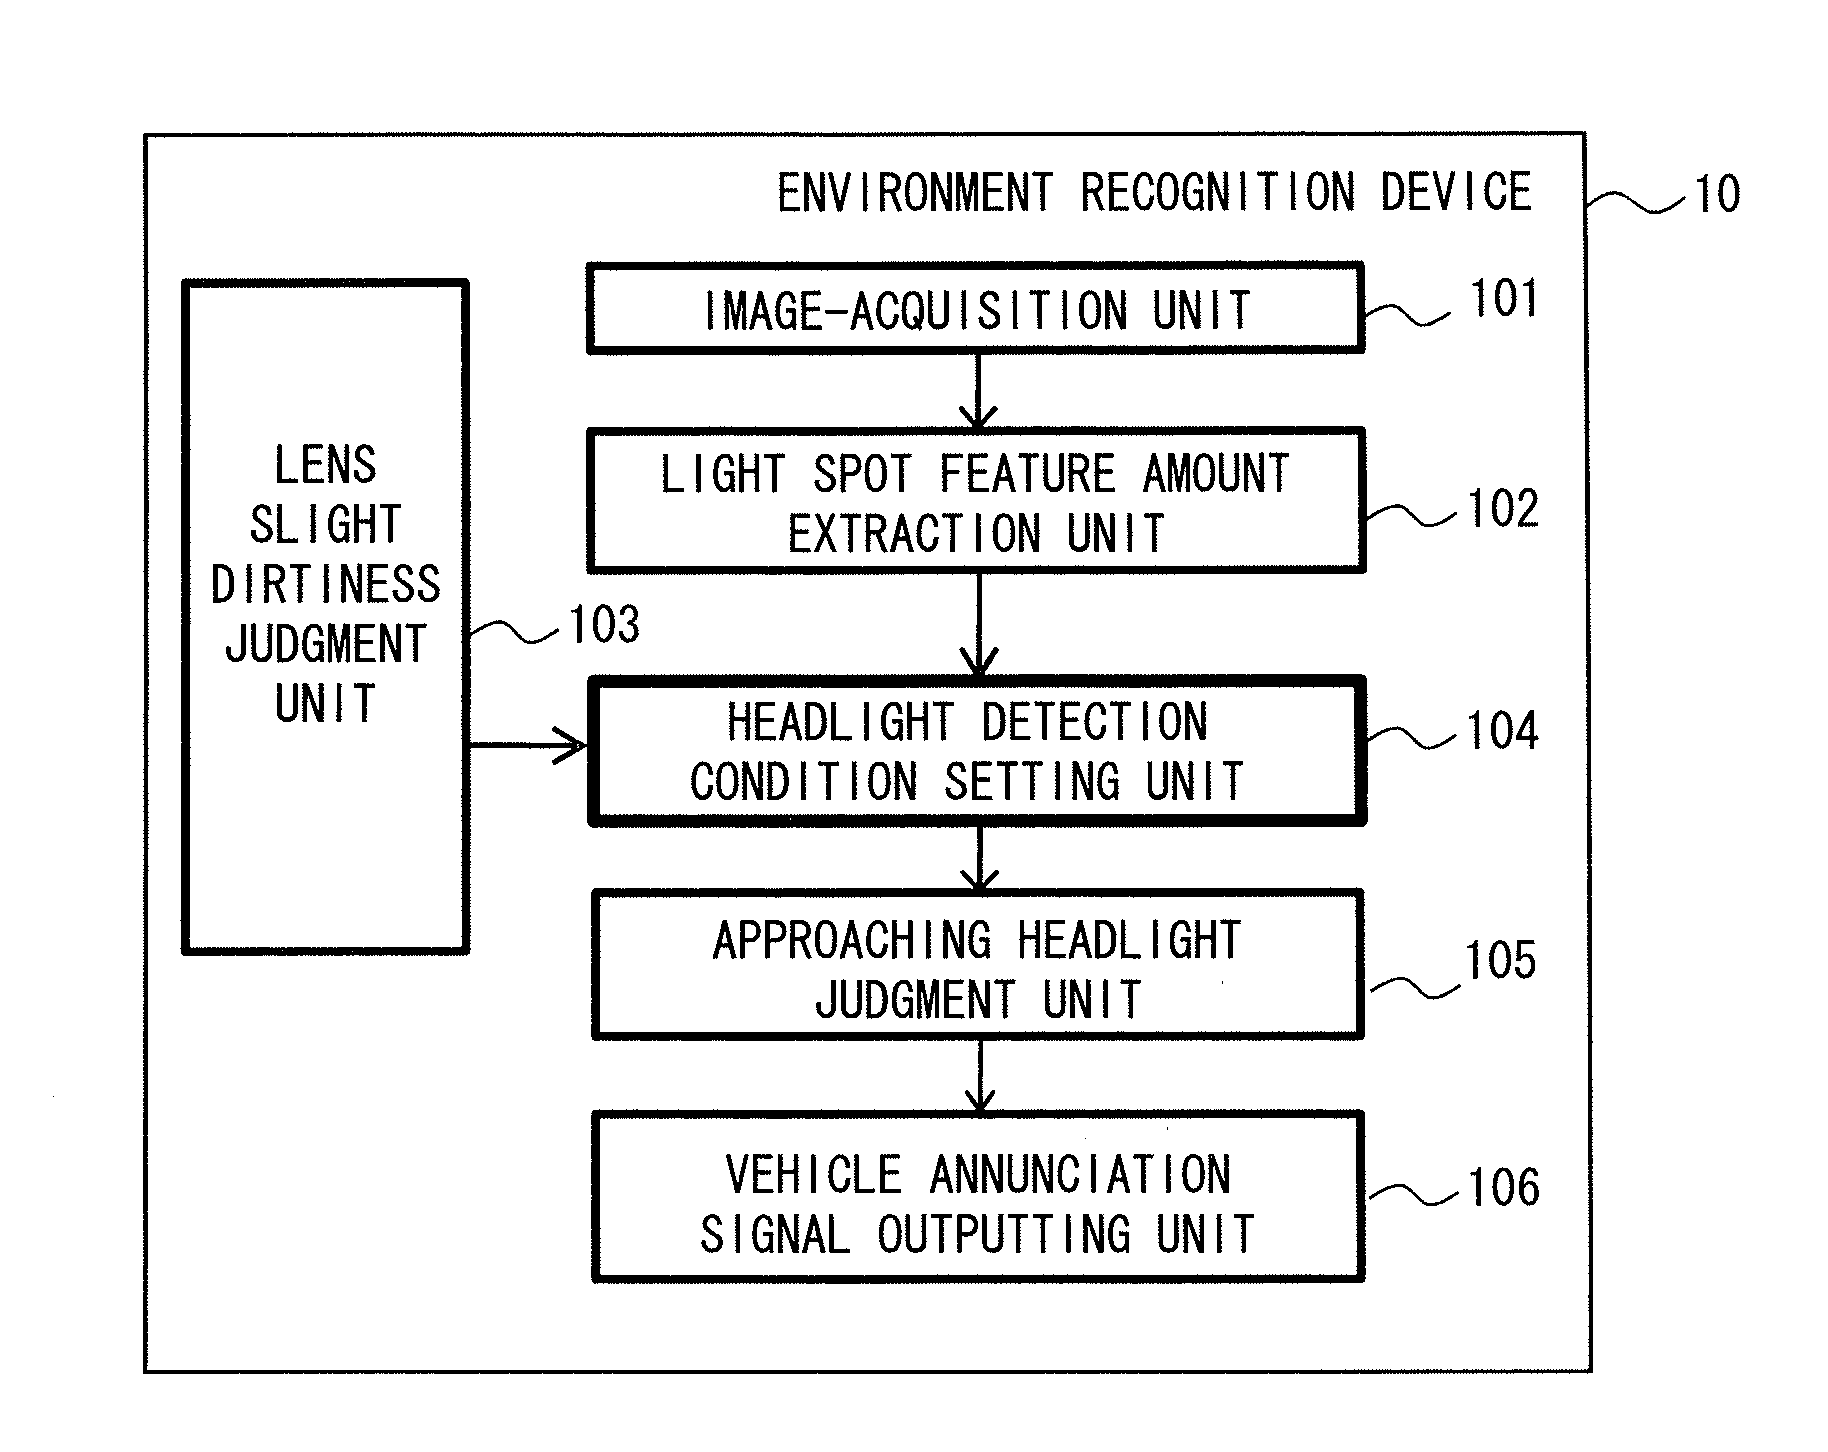 Environment Recognition Device